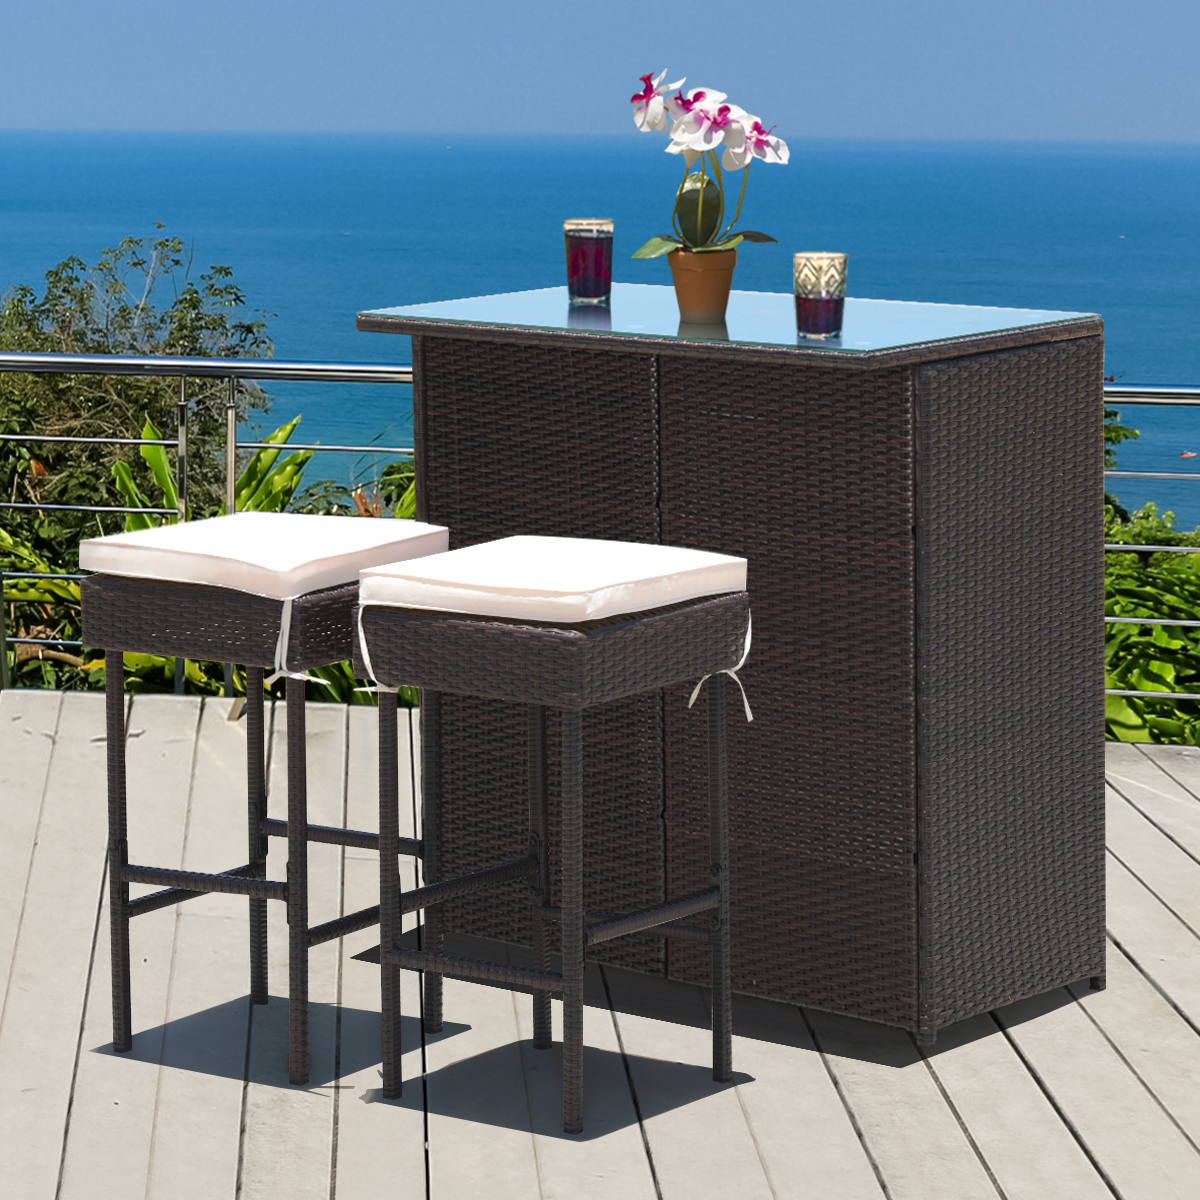 Costway 3PCS Patio Rattan Wicker Bar Table Stools Dining Set Cushioned Chairs Garden - image 4 of 10